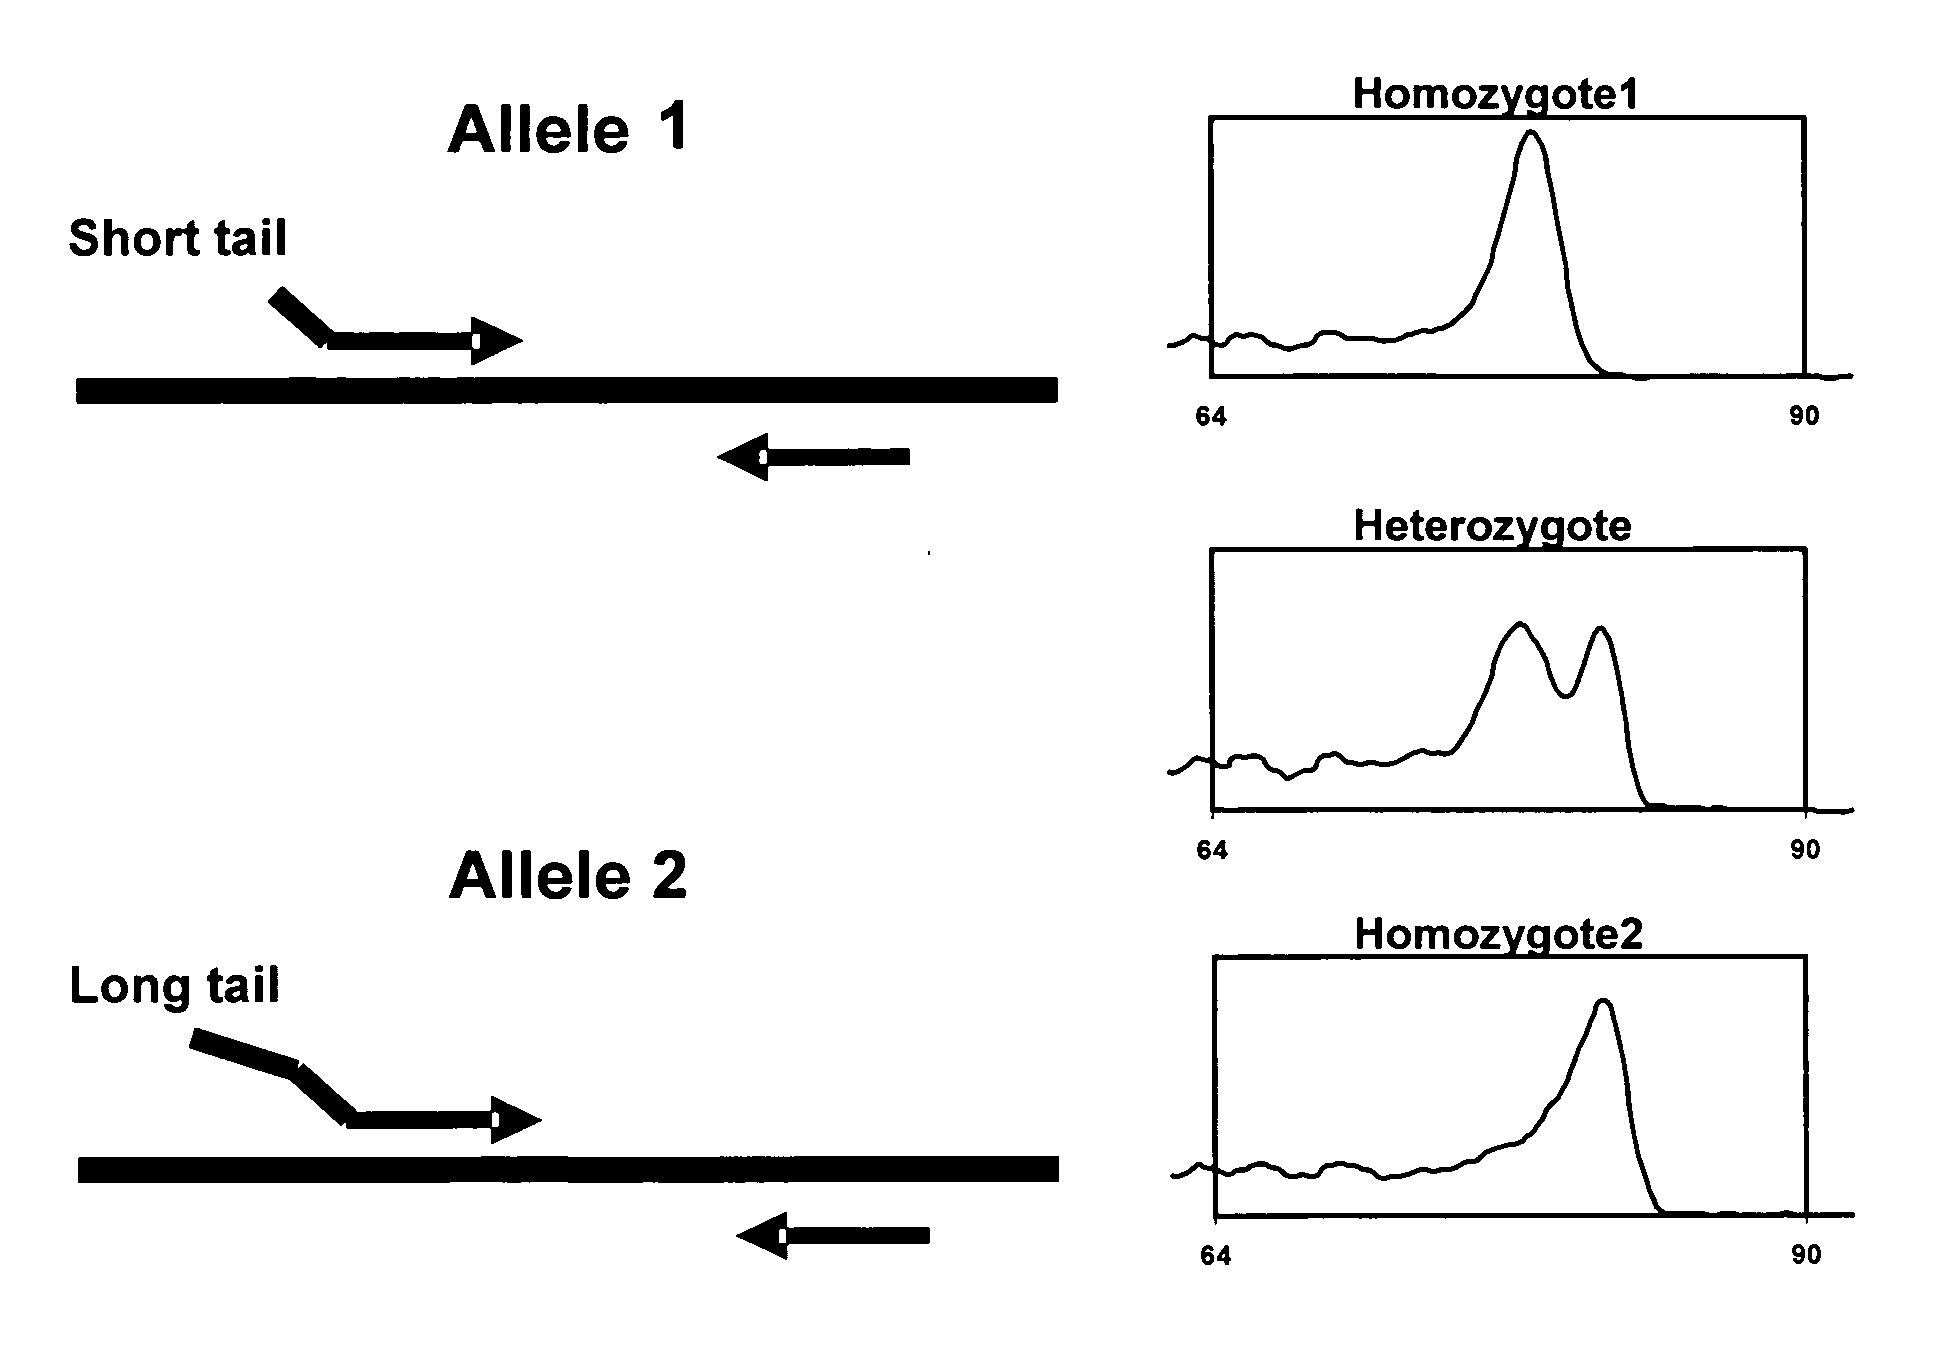 Methods of genotyping using differences in melting temperature